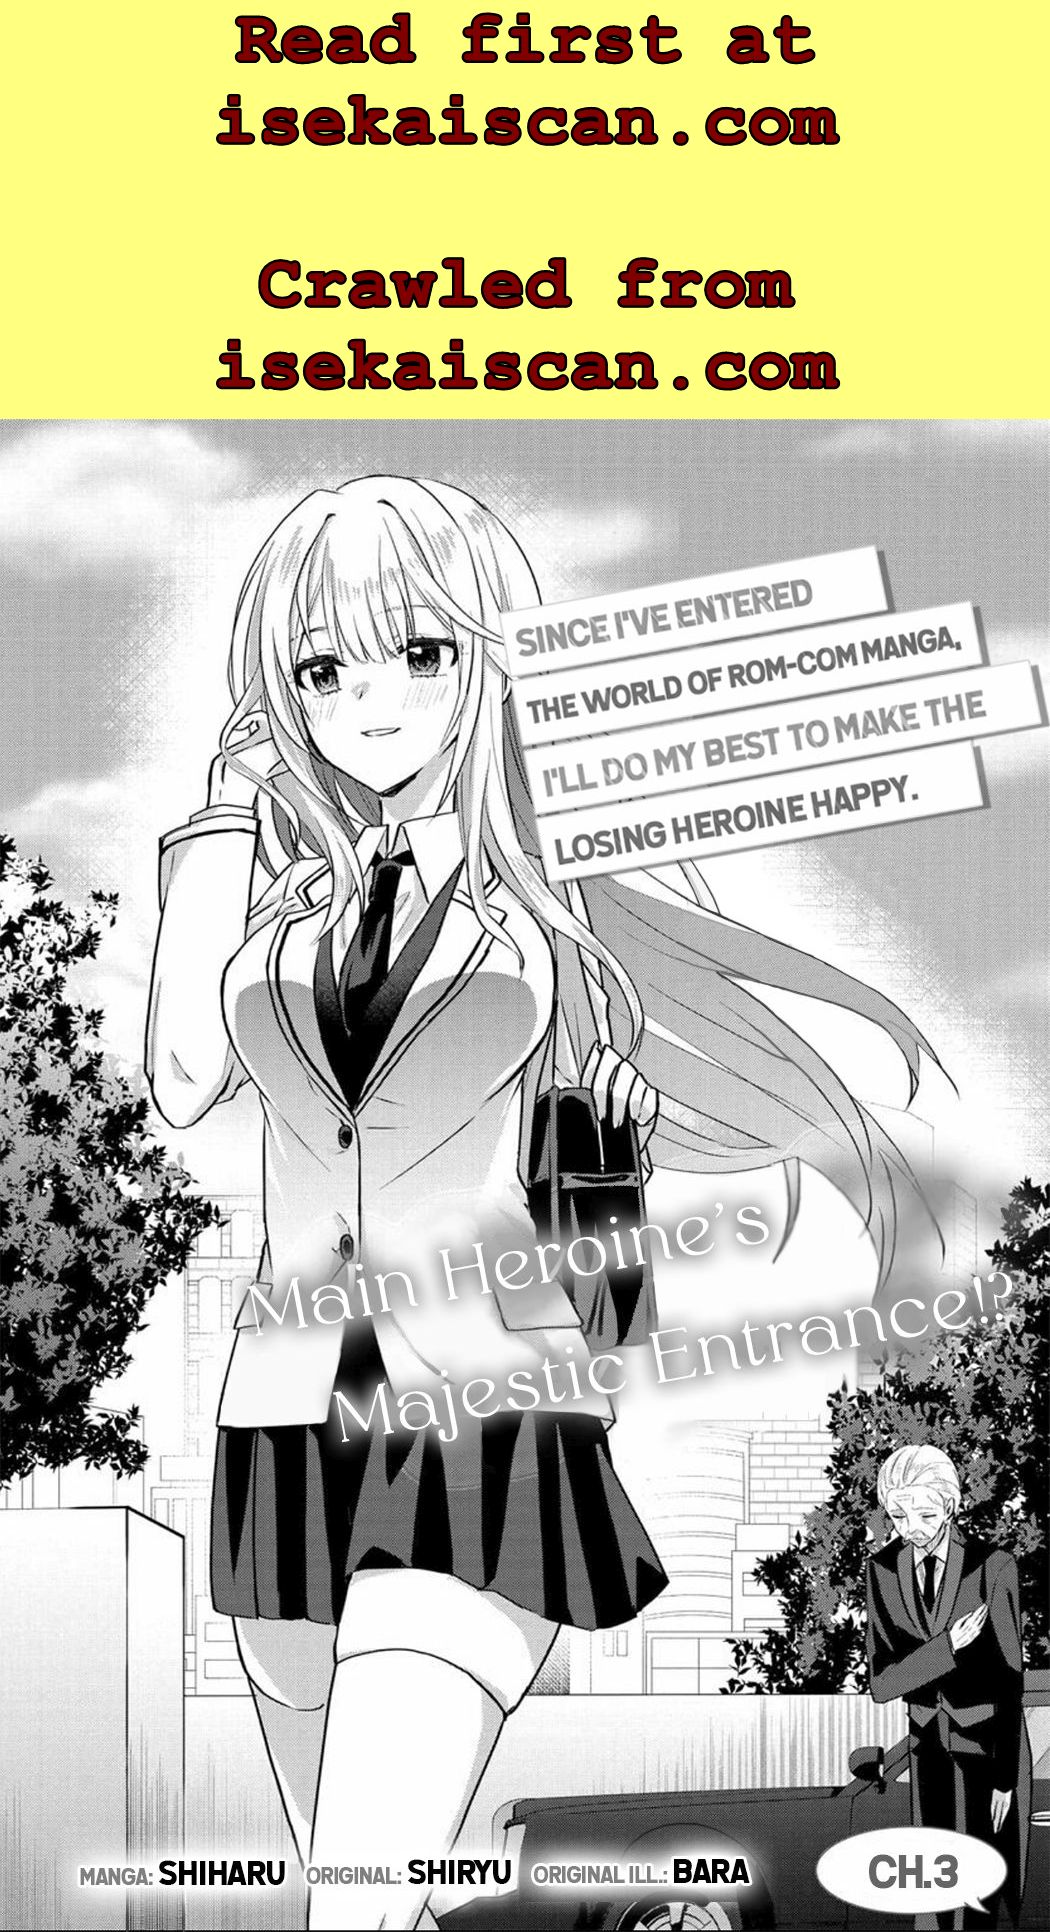 Since I’Ve Entered The World Of Romantic Comedy Manga, I’Ll Do My Best To Make The Losing Heroine Happy Chapter 3.1 #2